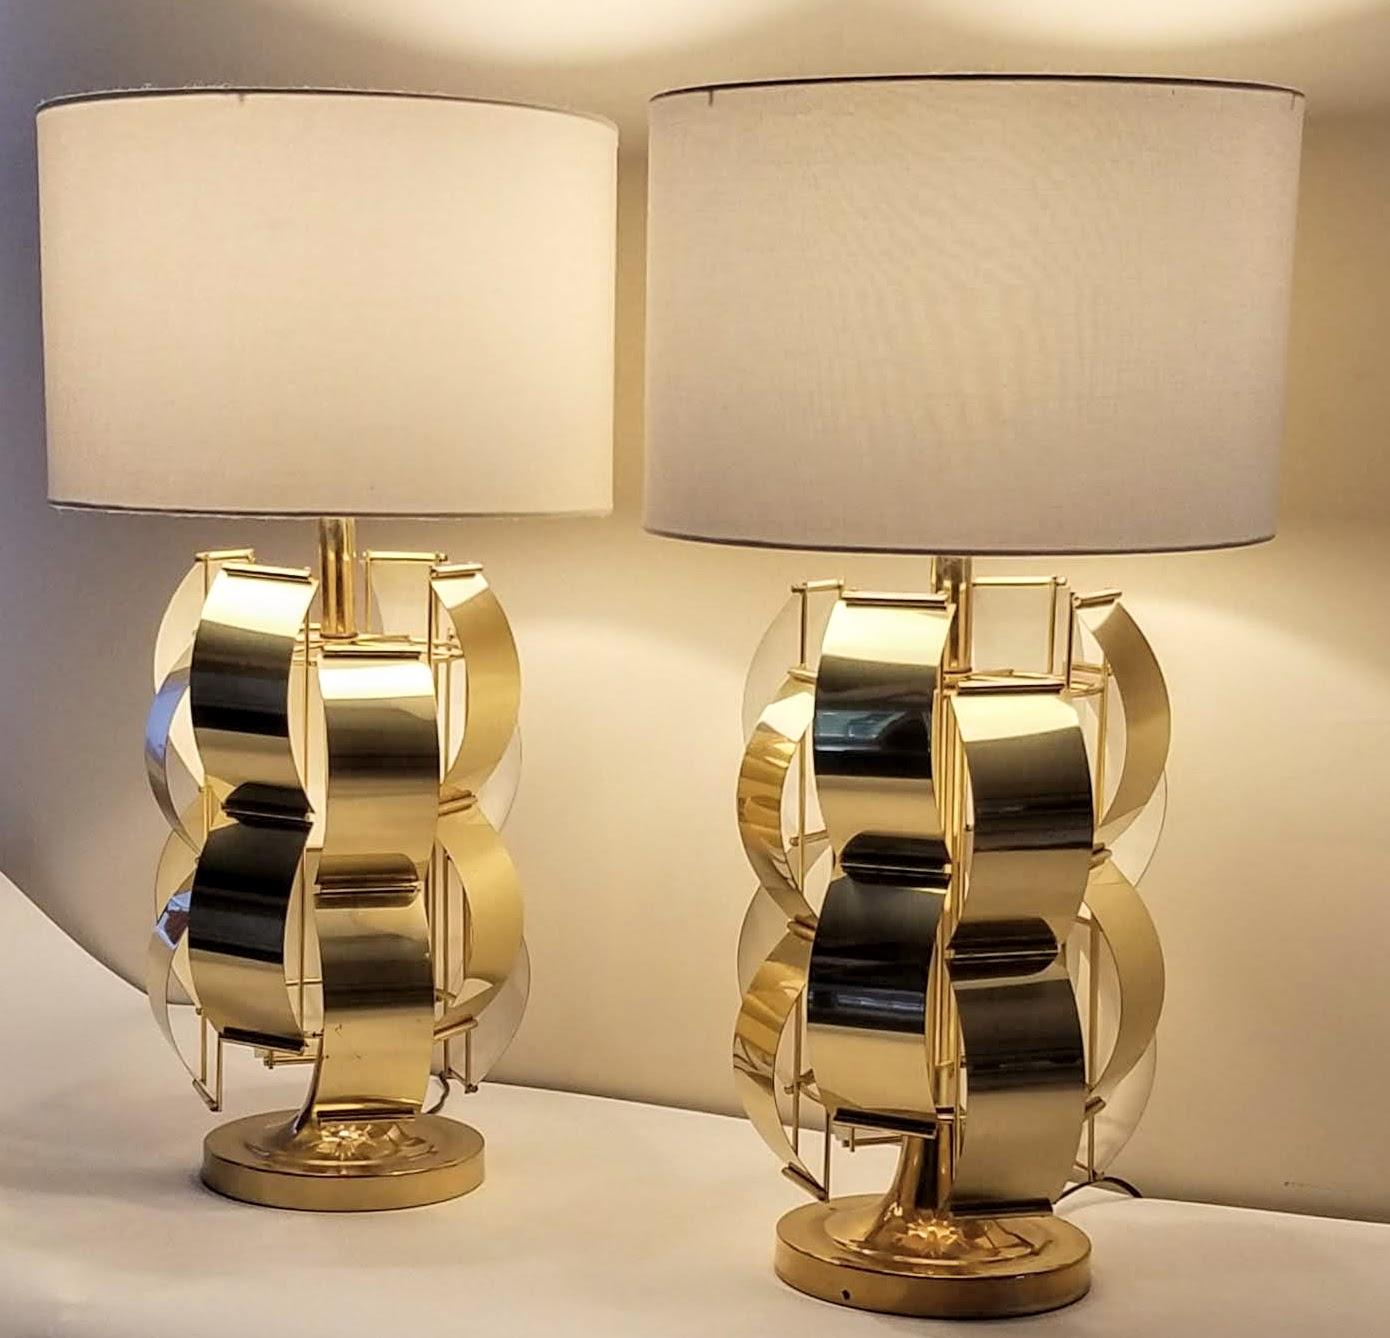 Max Sauze style of pair of brass table lamps Lightolier manufactured in the mid-1960s.
There are sixteen brass panels on each lamp lacquered white on the inside and held by flexing them into eight brass rod holders welded to a central column.
The